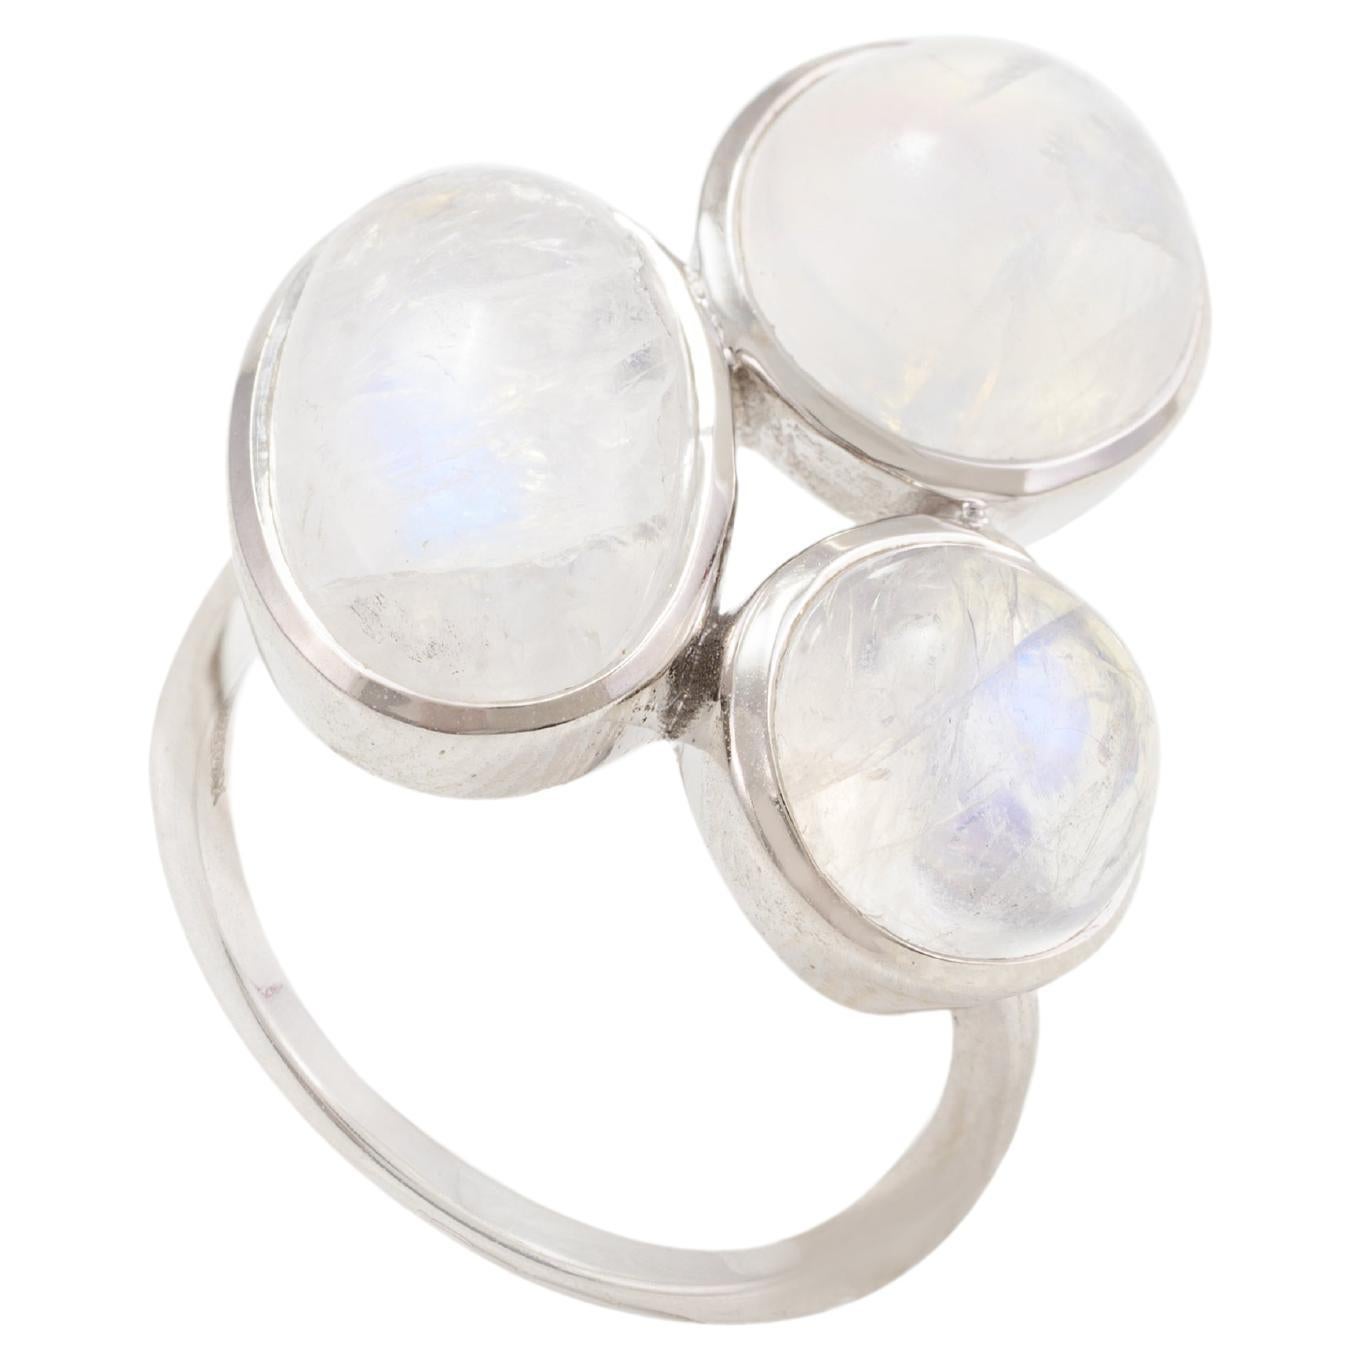 Statement Three-Stone 9.86 CTW Moonstone Cocktail Ring in 18k Solid White Gold